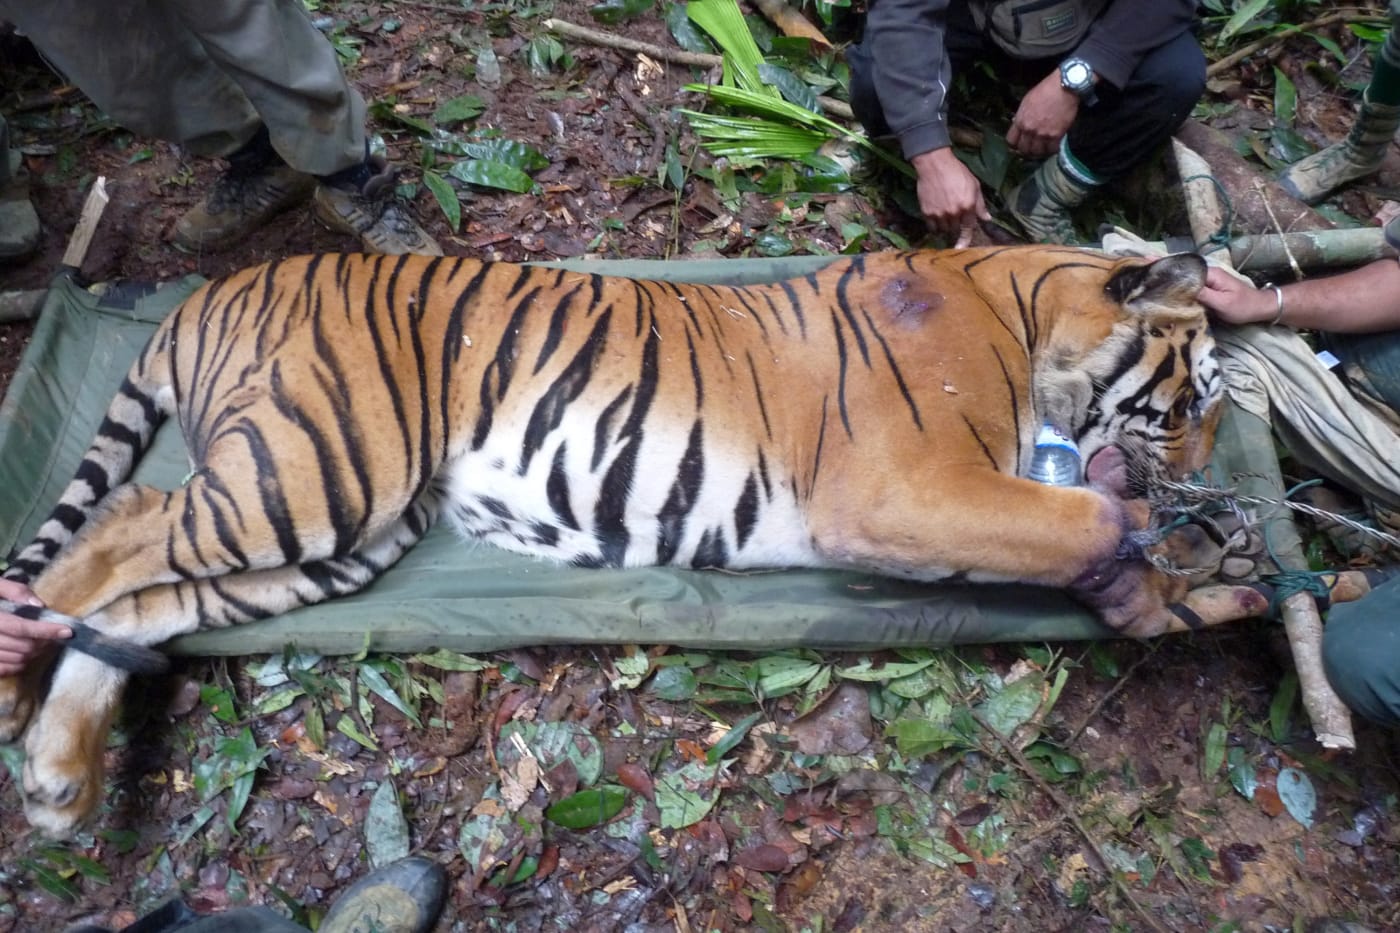 A snared tiger being rescued by personnel from the Department of Wildlife and National Parks. It was discovered by one of WWF-Malaysia's patrol teams in a snare set by local poachers in the Belum-Temengor Forest Complex, Malaysia.